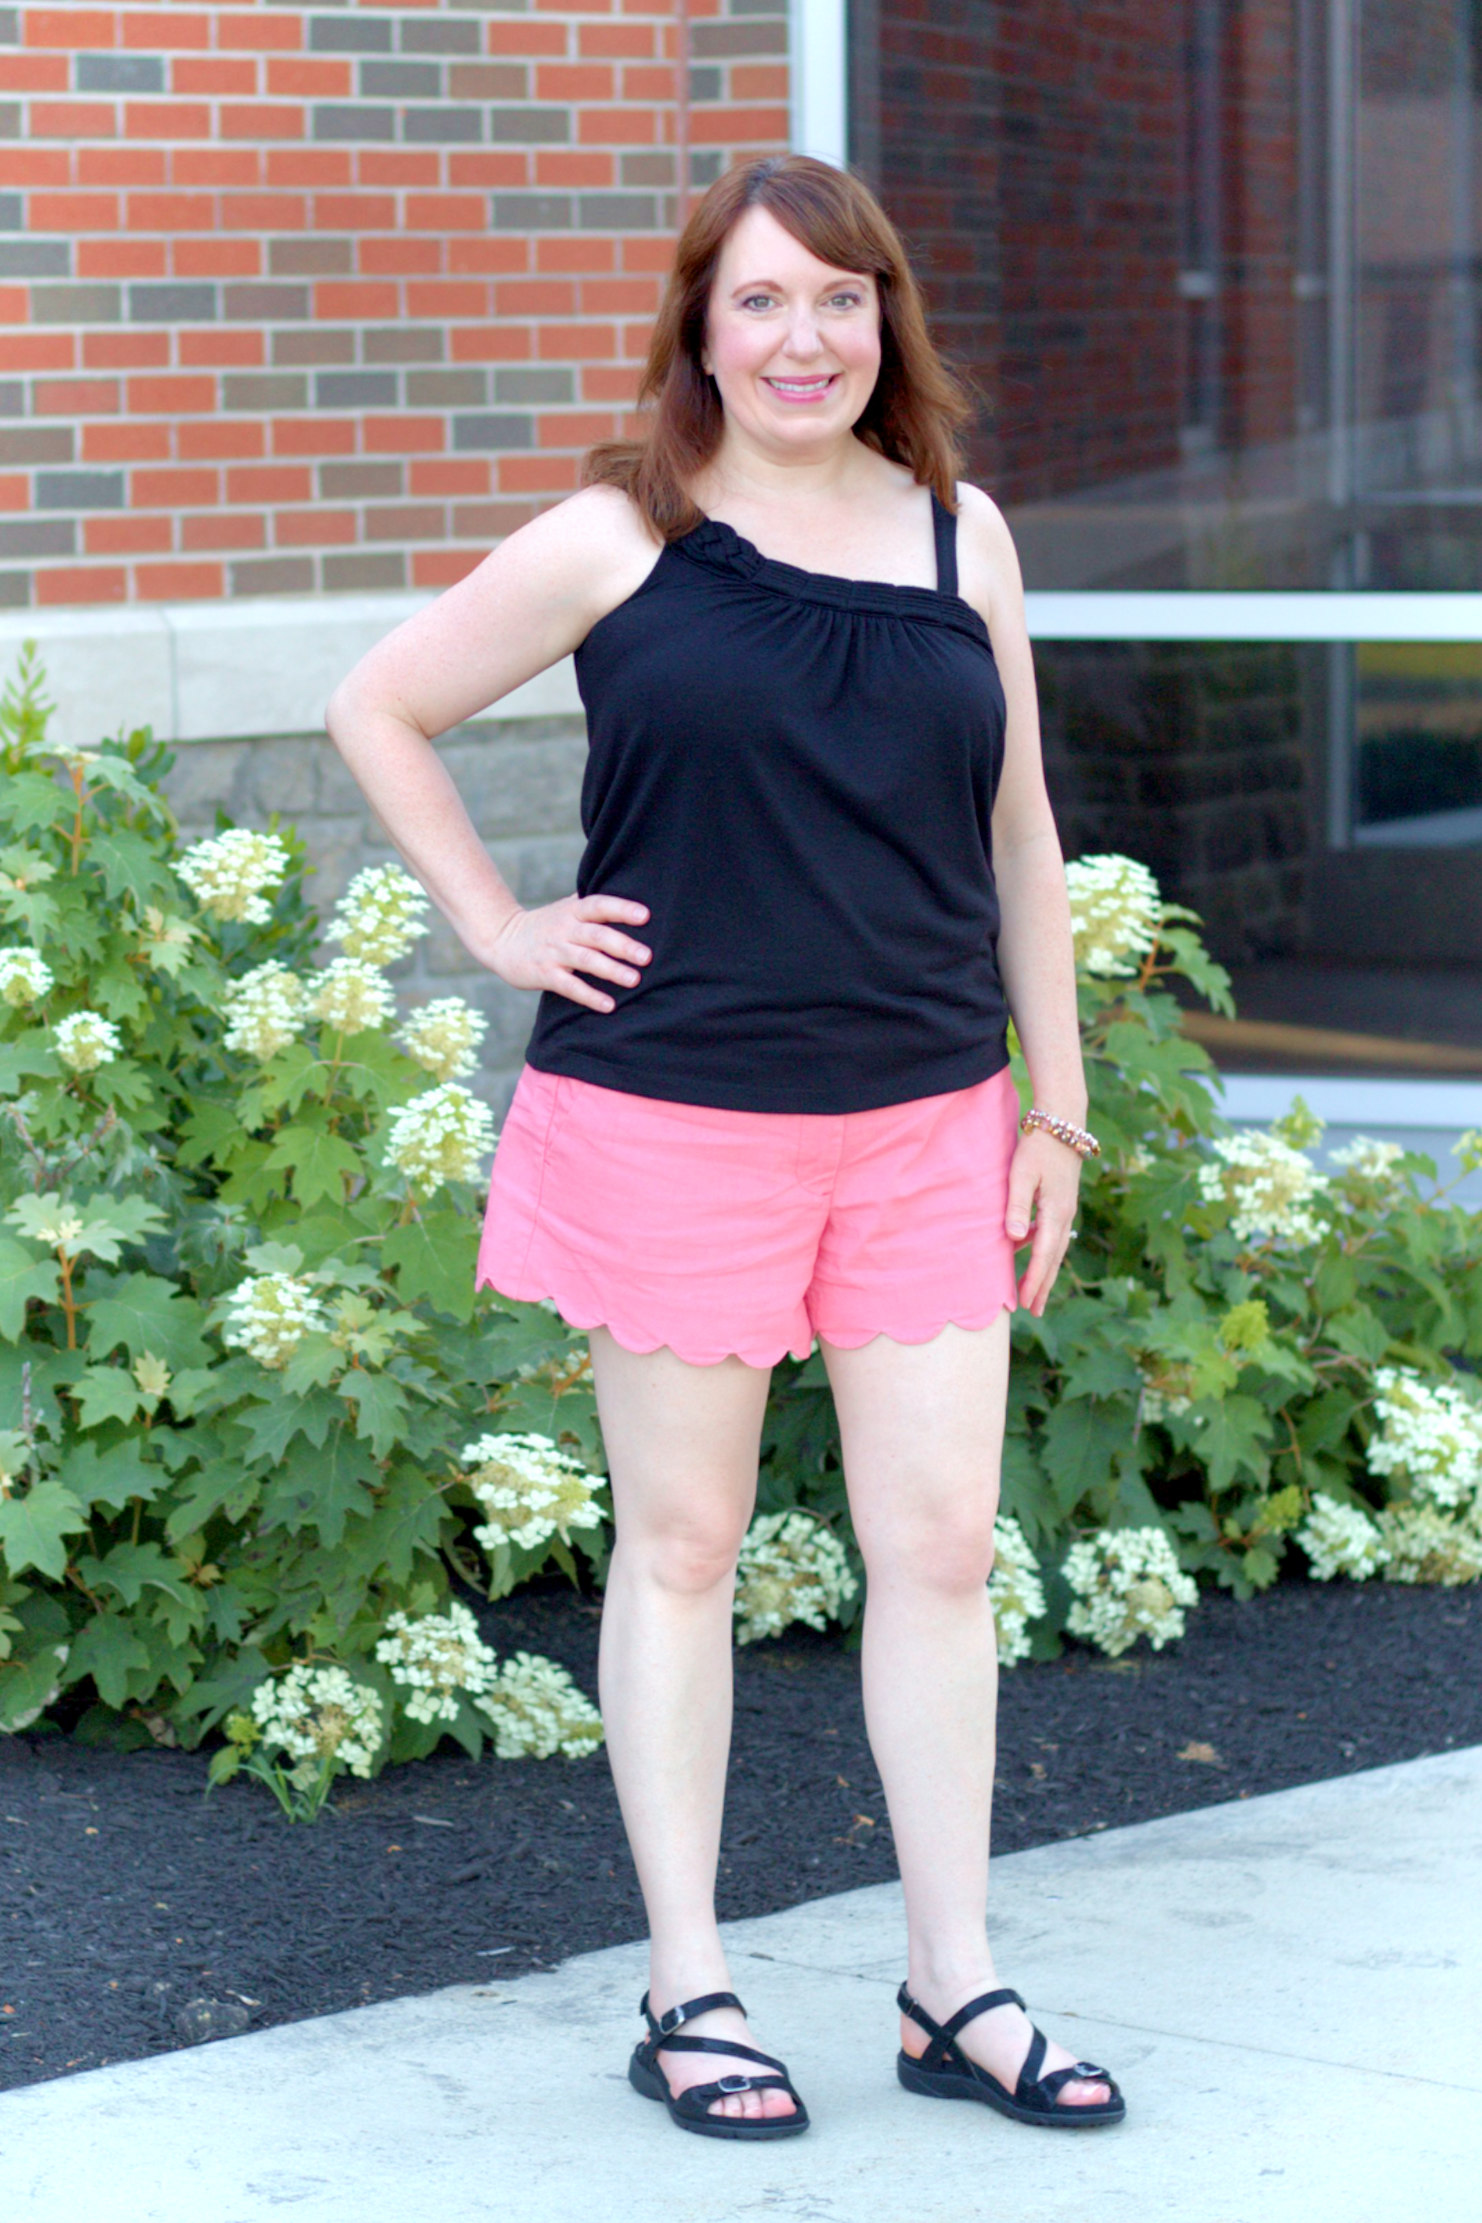 Summer Style With Black & Pink